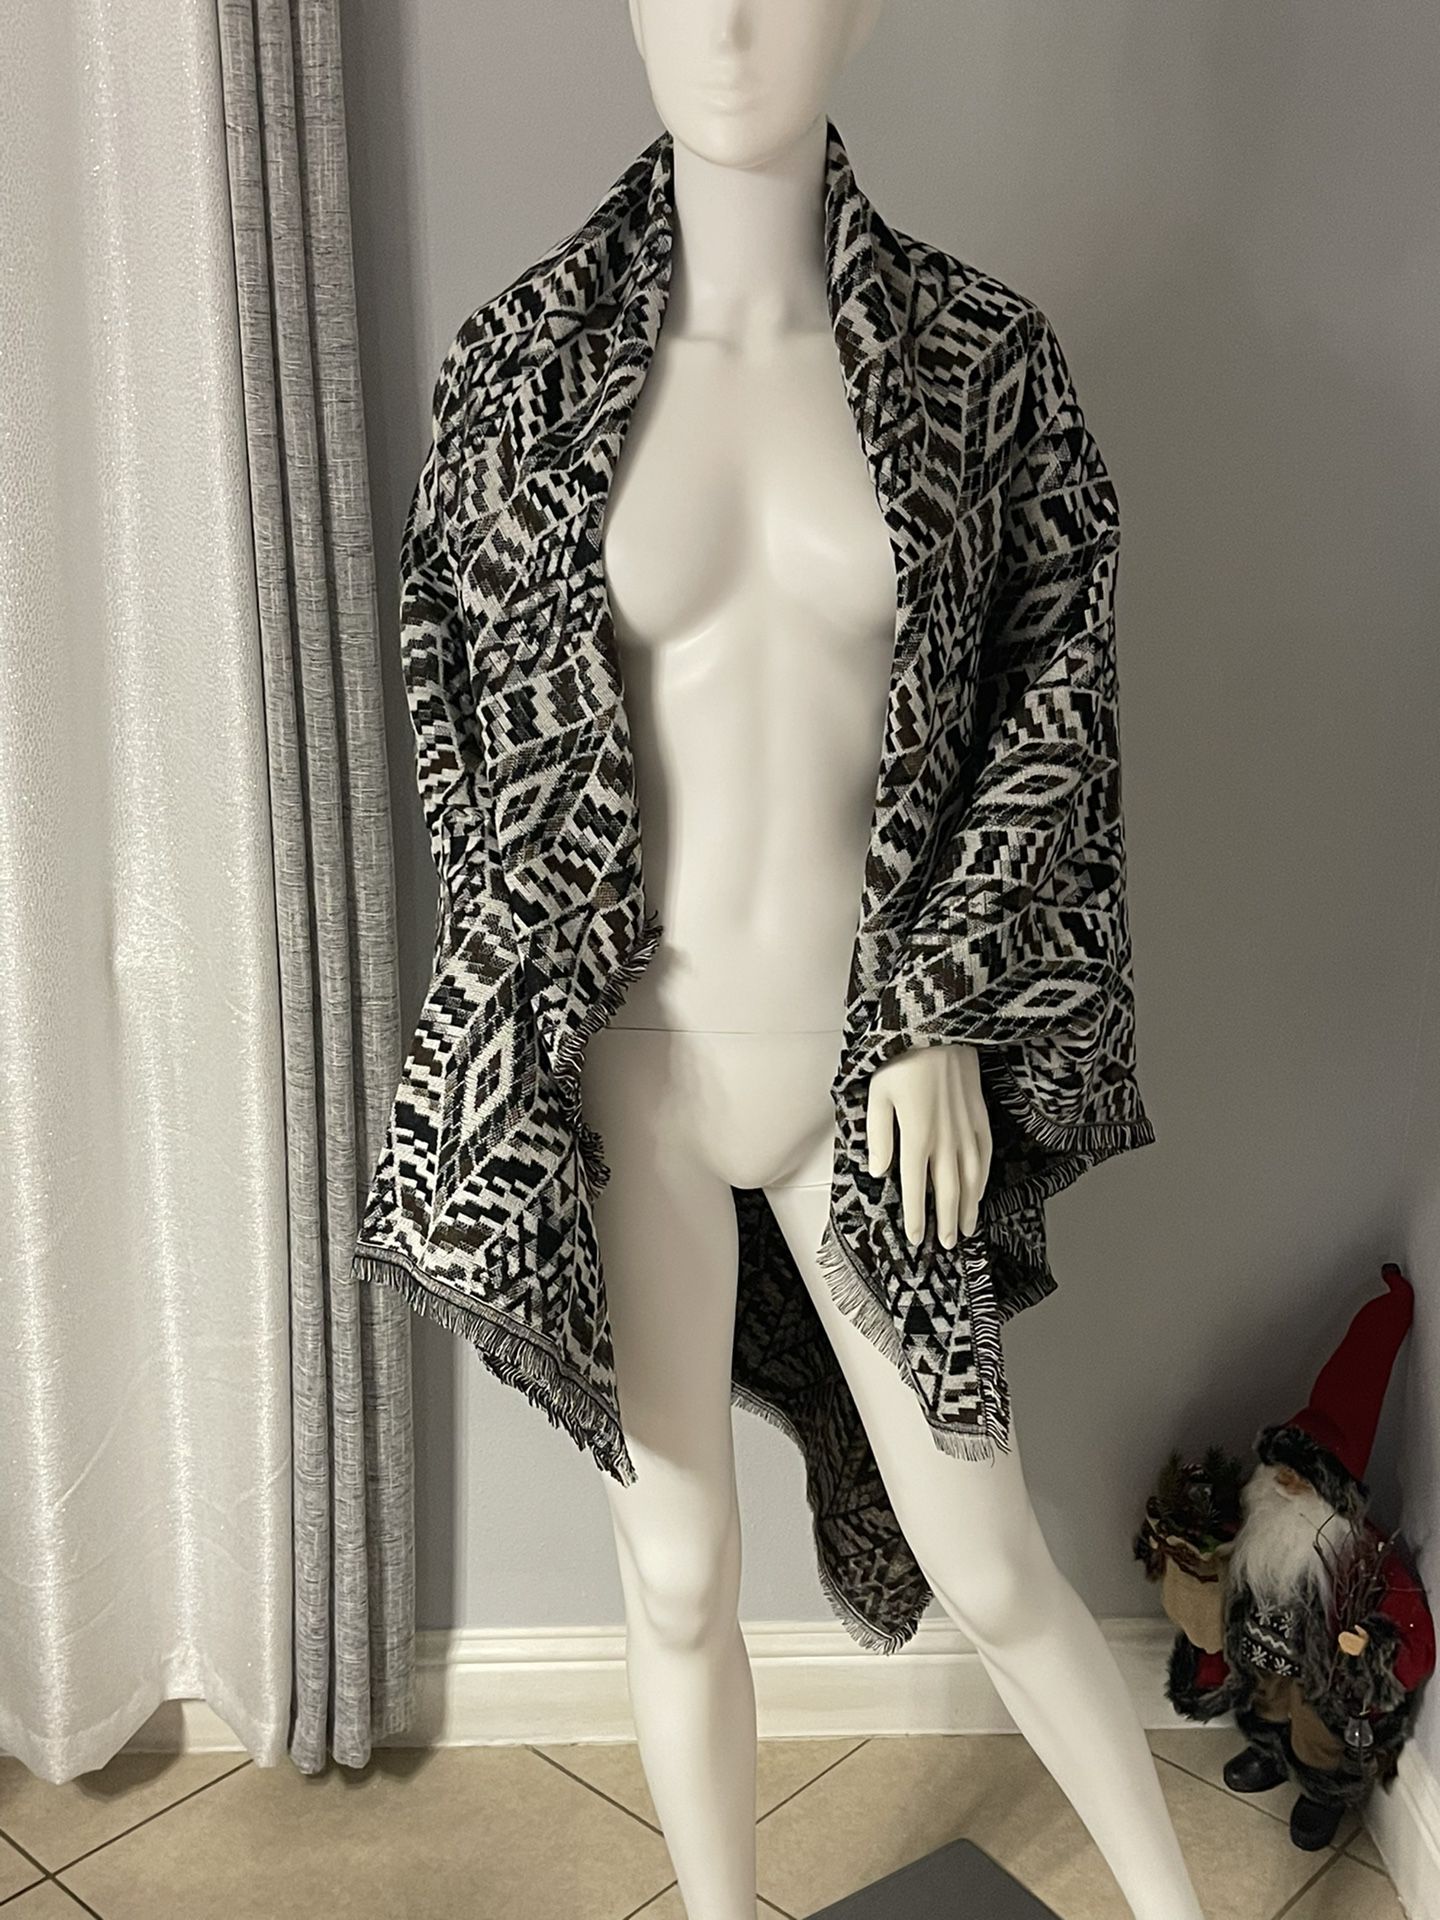 New Women’s Fall Cover up size One size  Fits up to size 16 Very spacious and comfy! poncho style